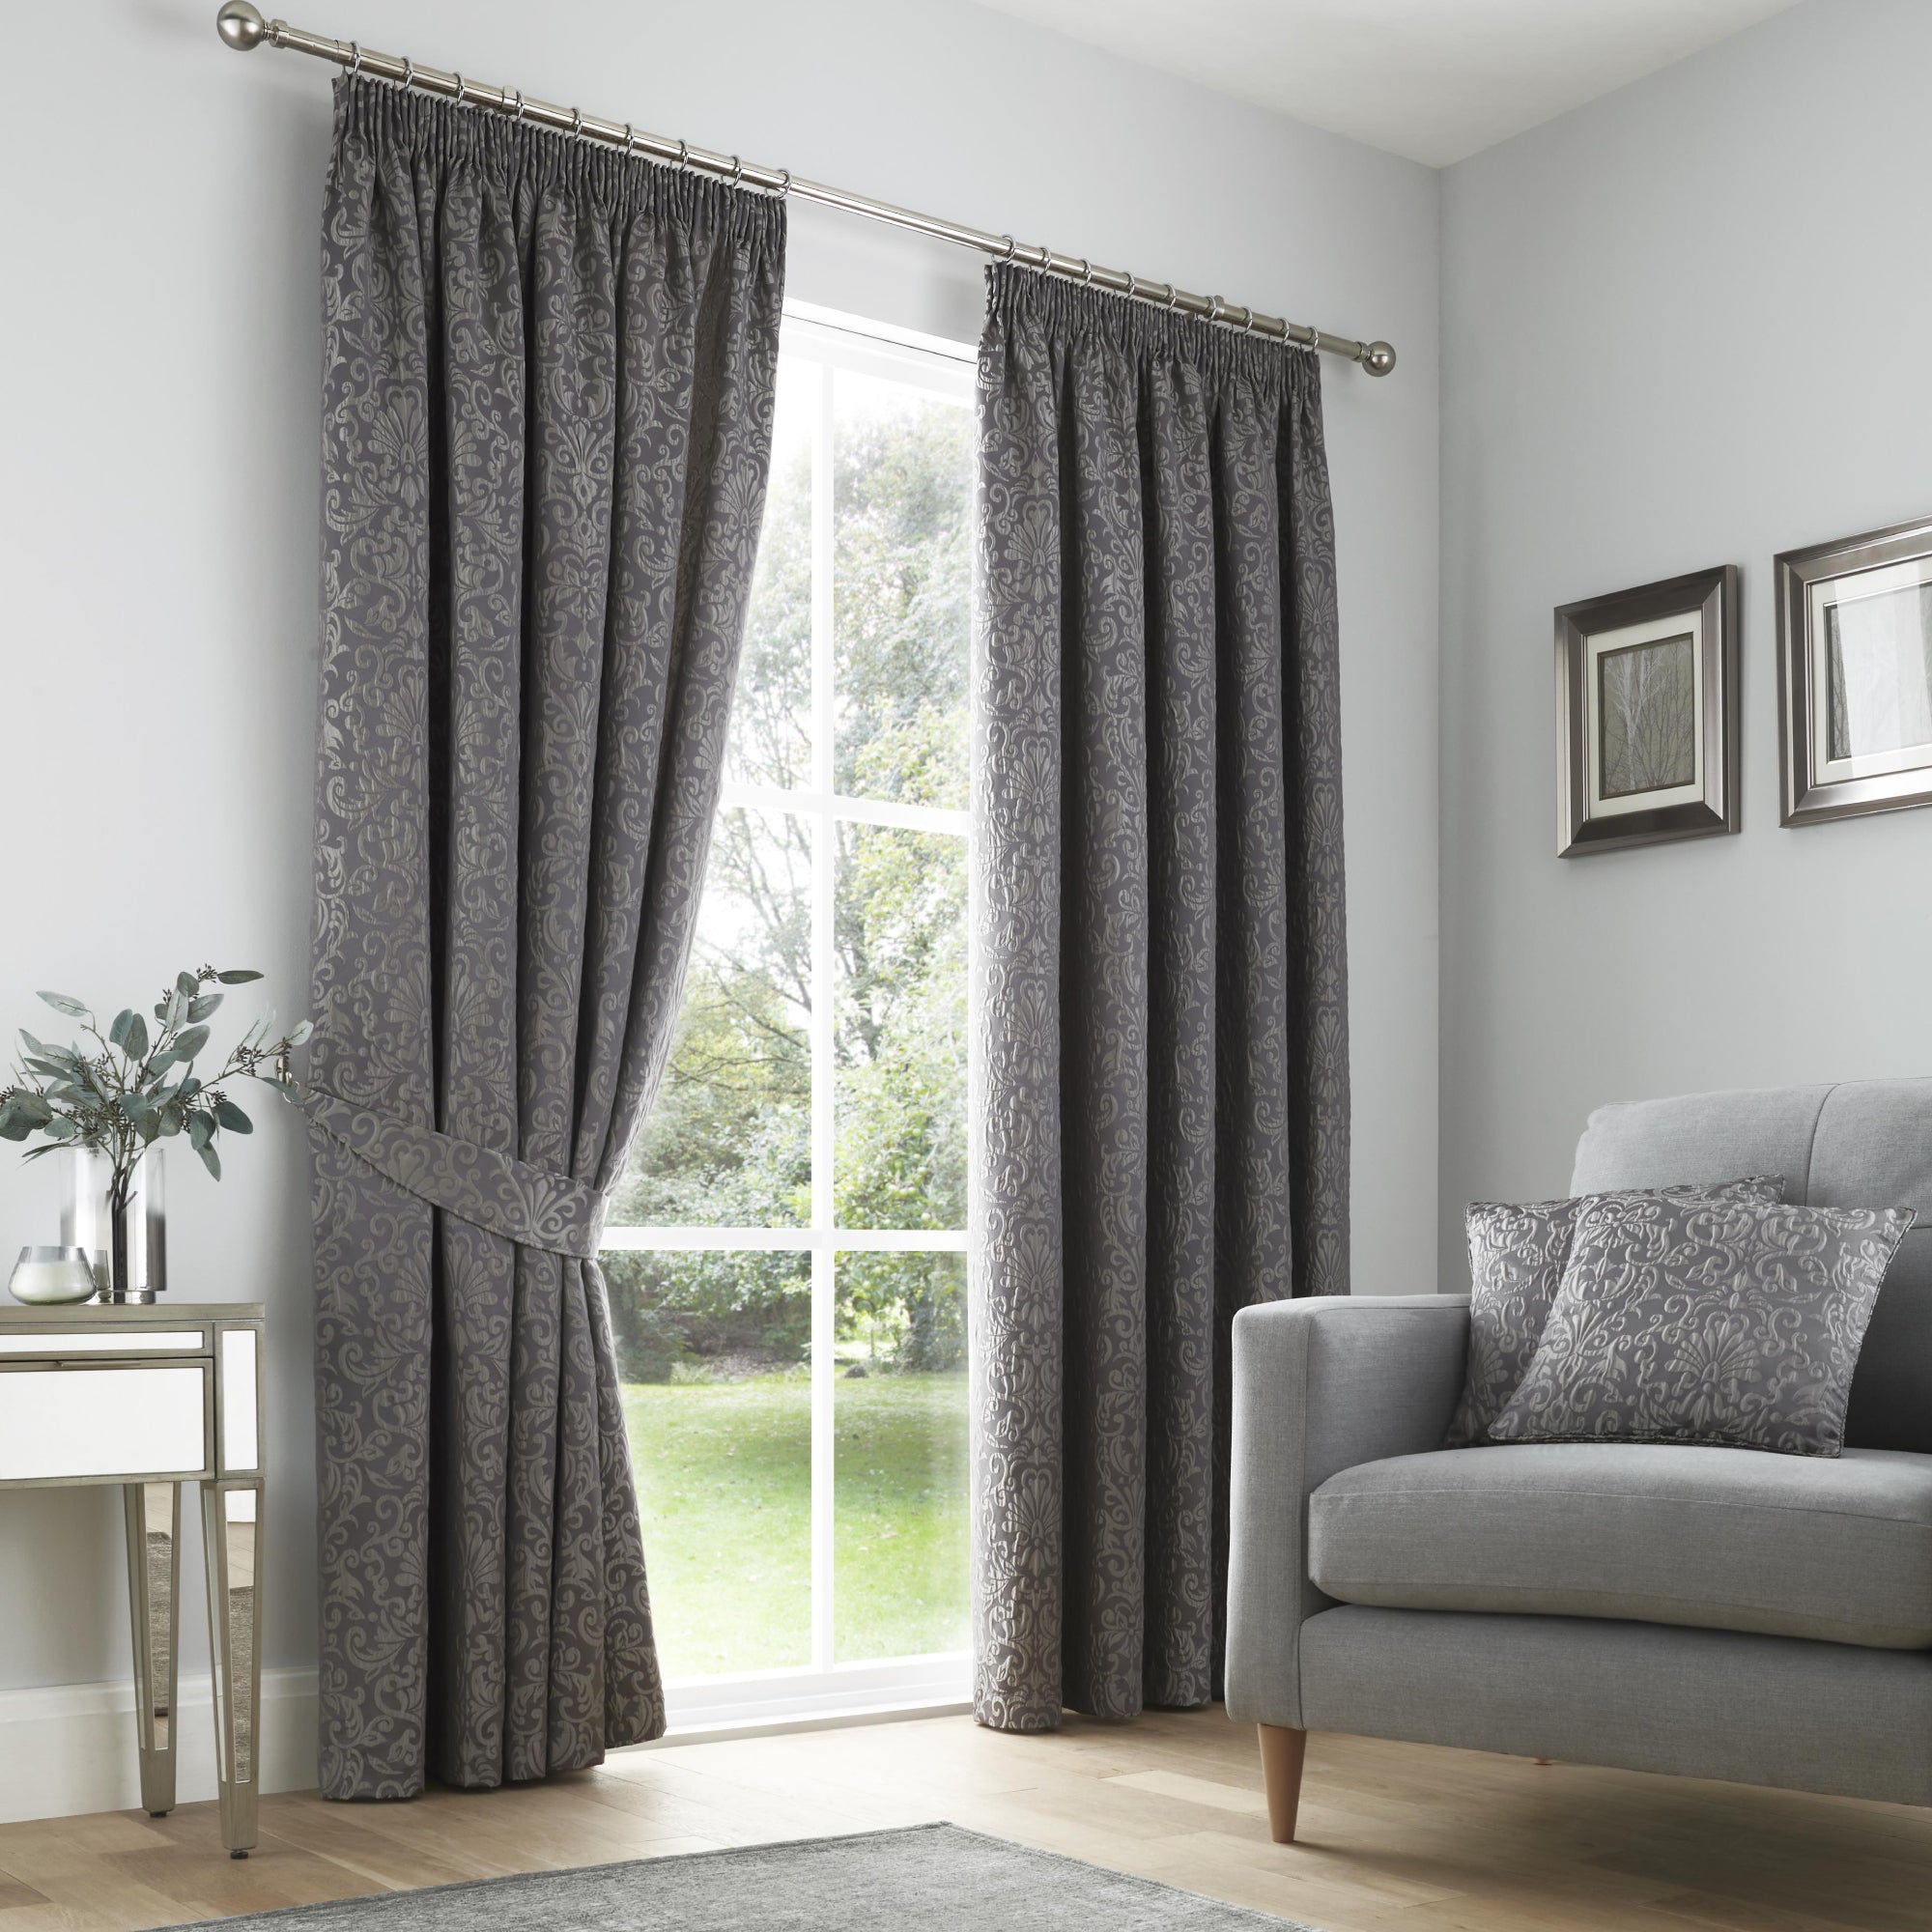 Pair of Pencil Pleat Curtains Lamina by Curtina in Slate